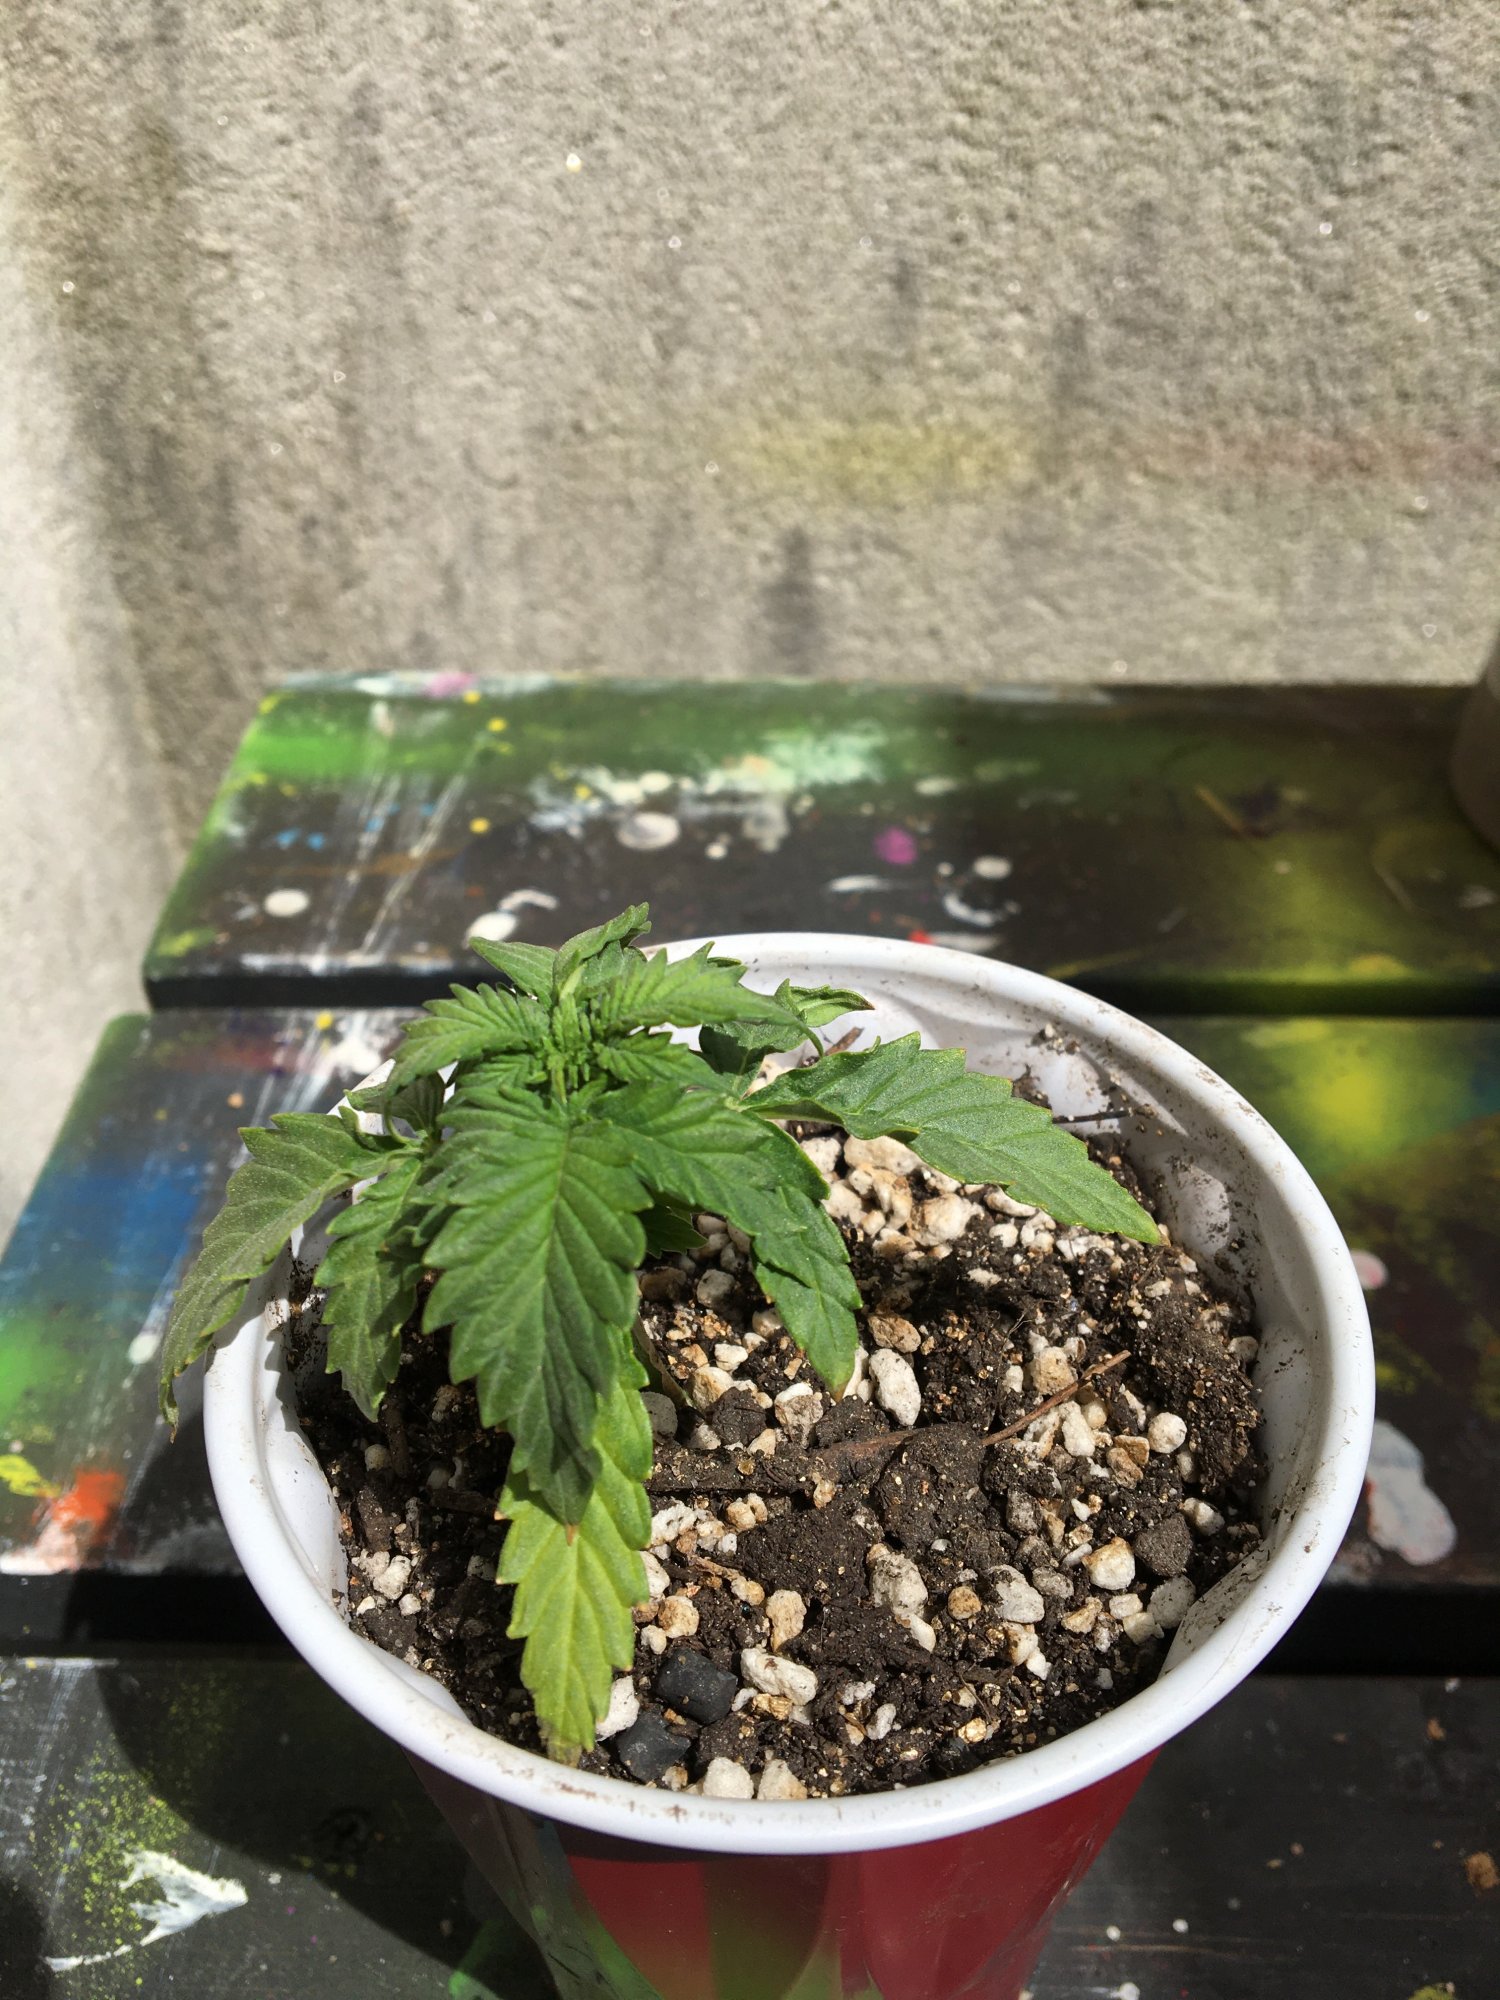 Leaf curling and yellowing issues on seedlings 3